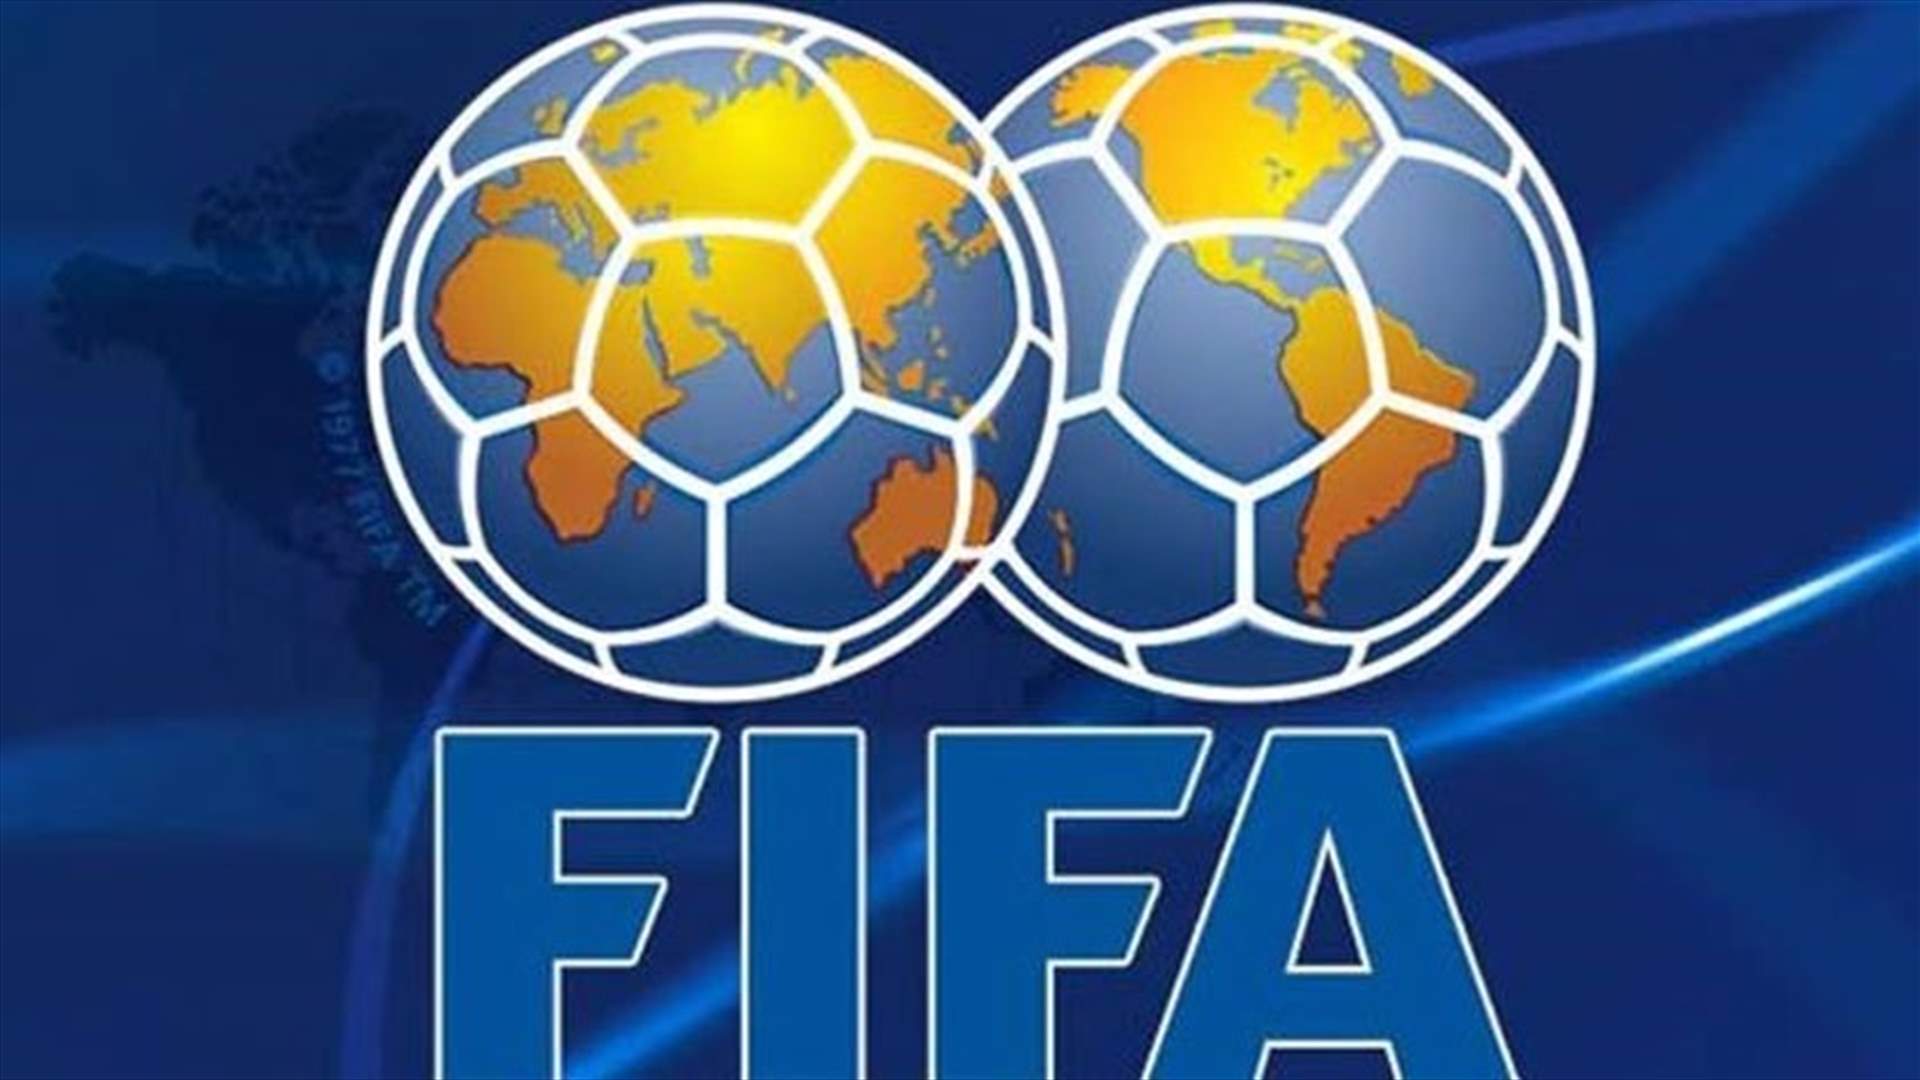 Swiss court rejects claim against FIFA over Qatar World Cup